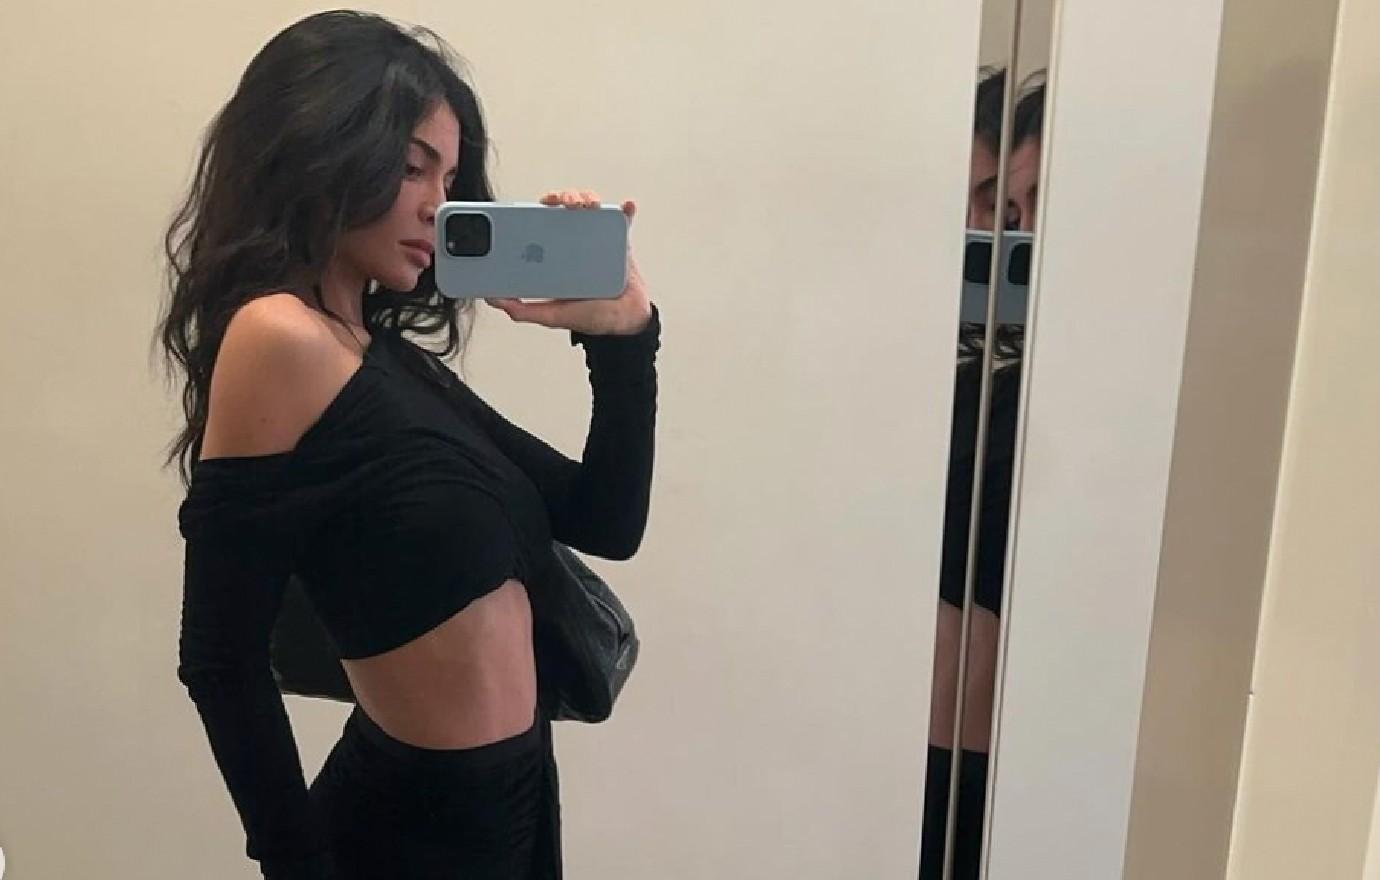 Kendall and Kylie Jenner show off their assets in plunging tops